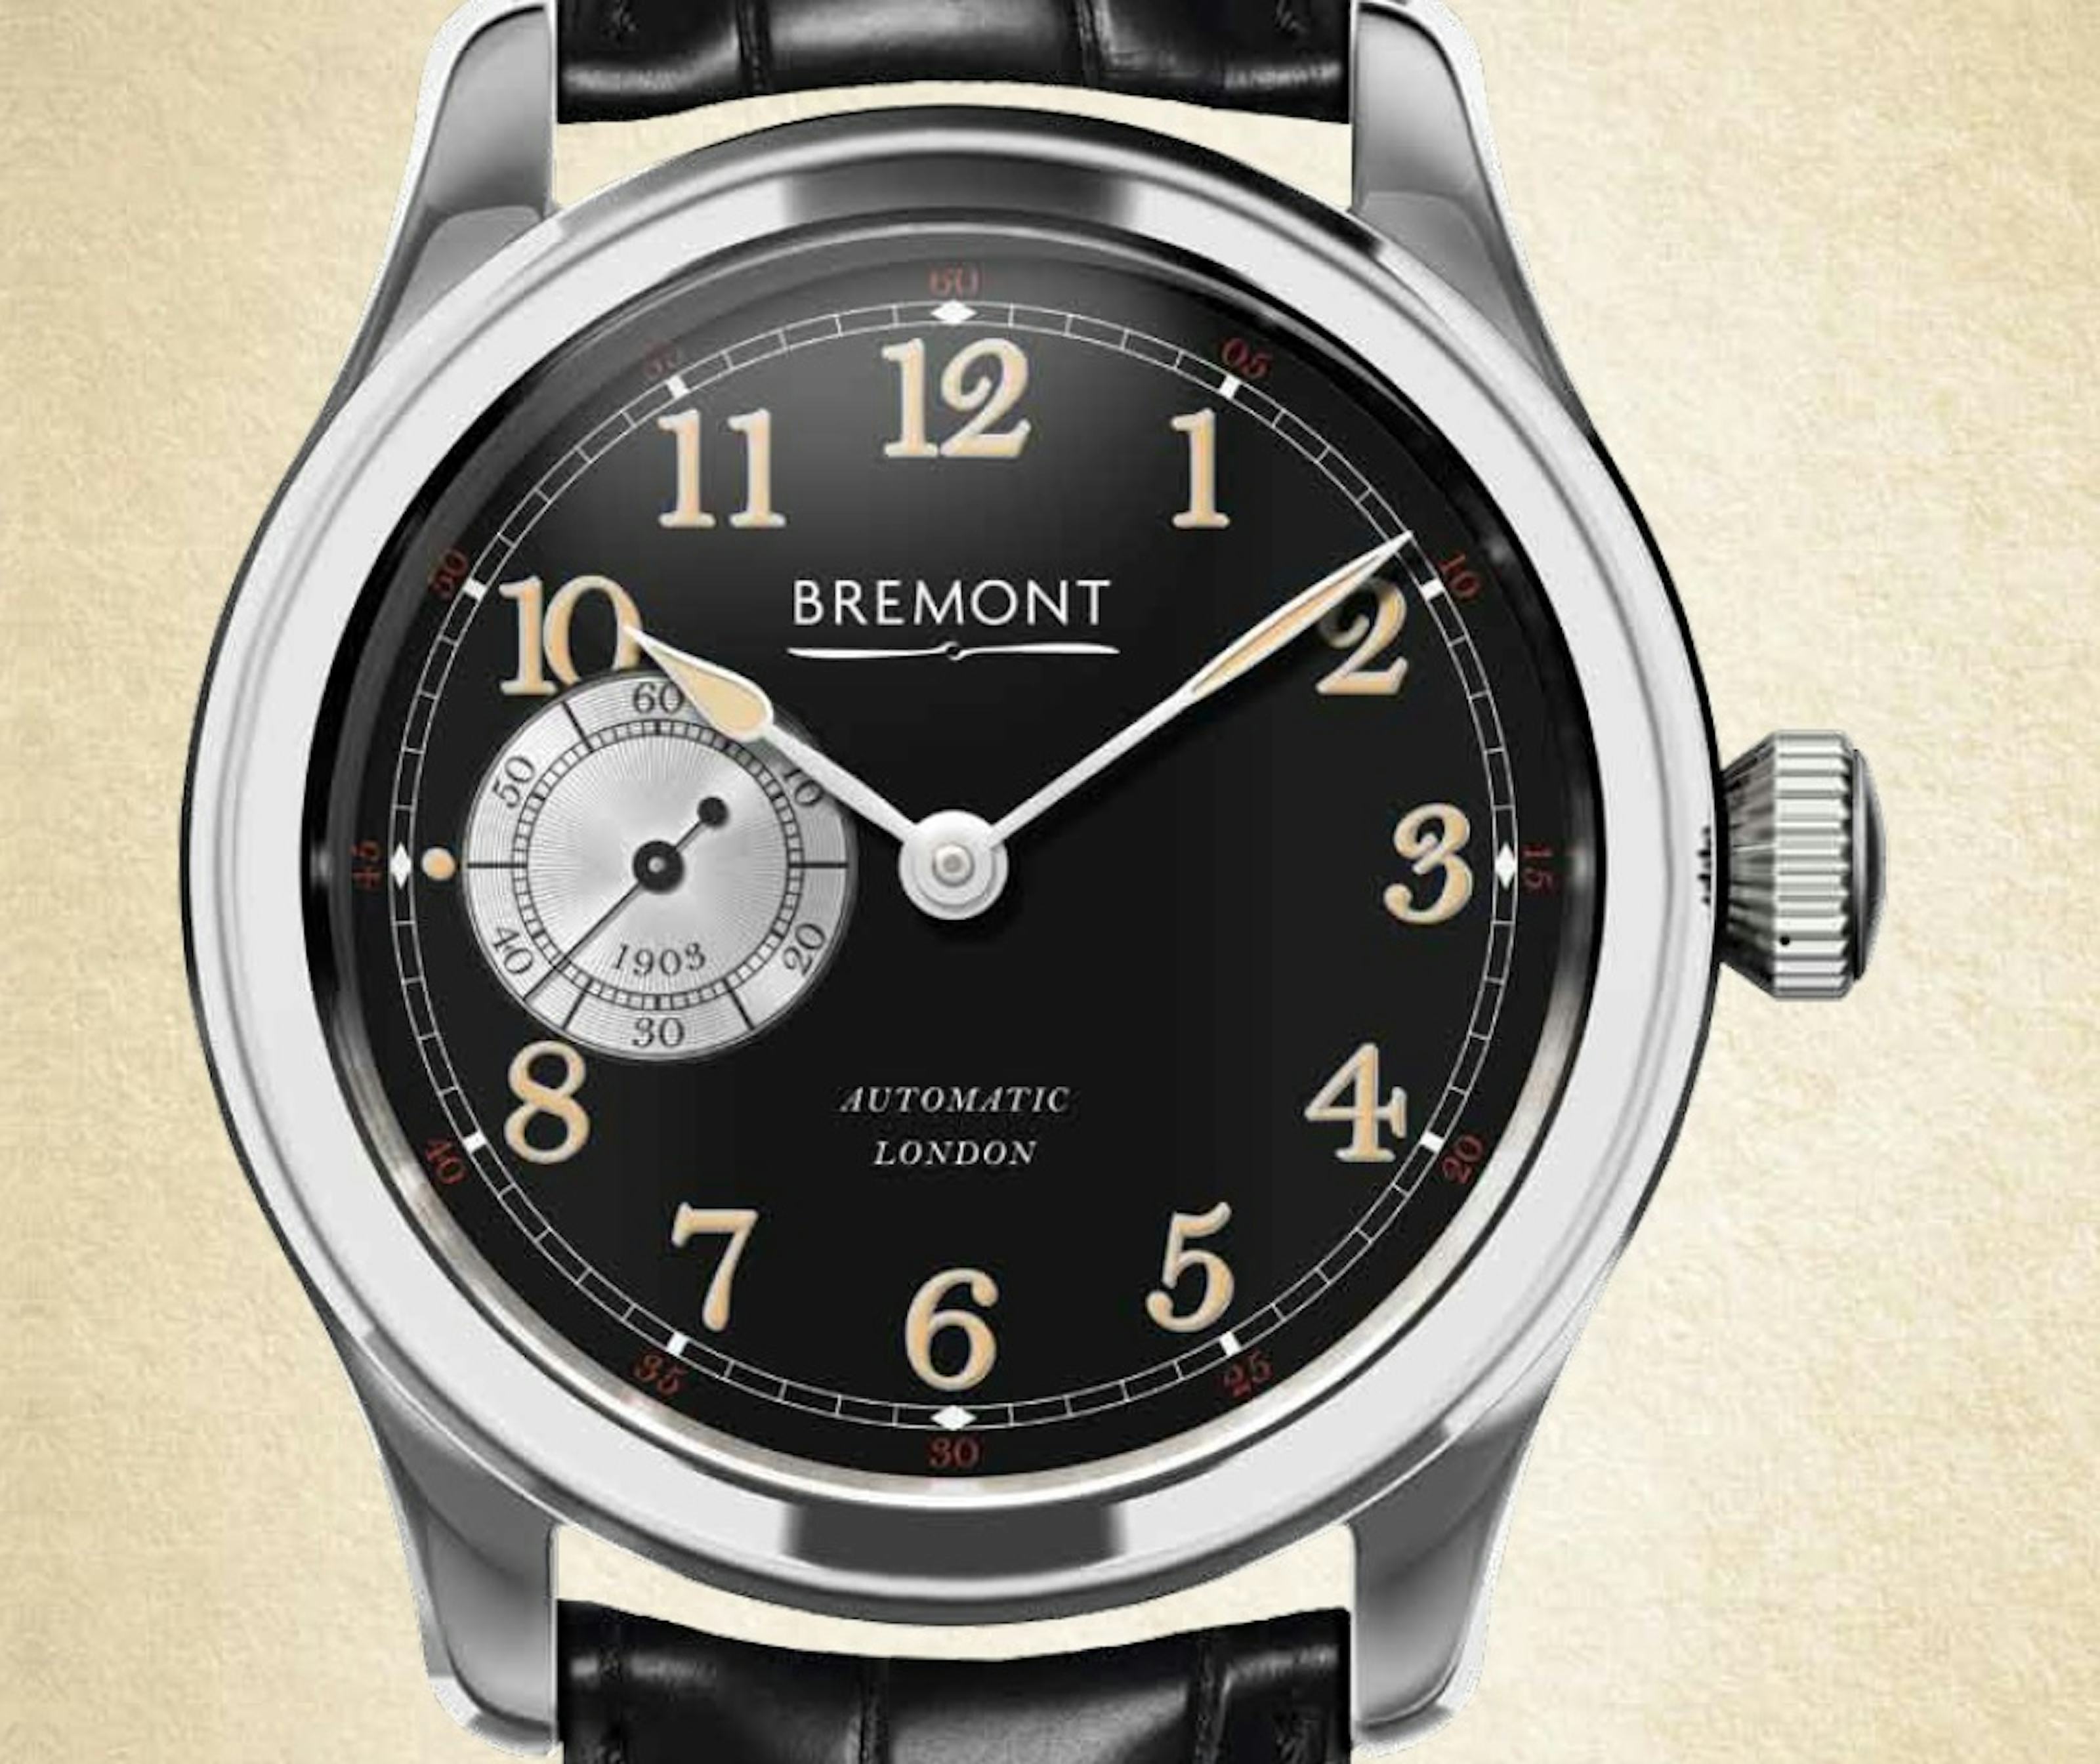 Bremont Wright Flyer: The Wright House